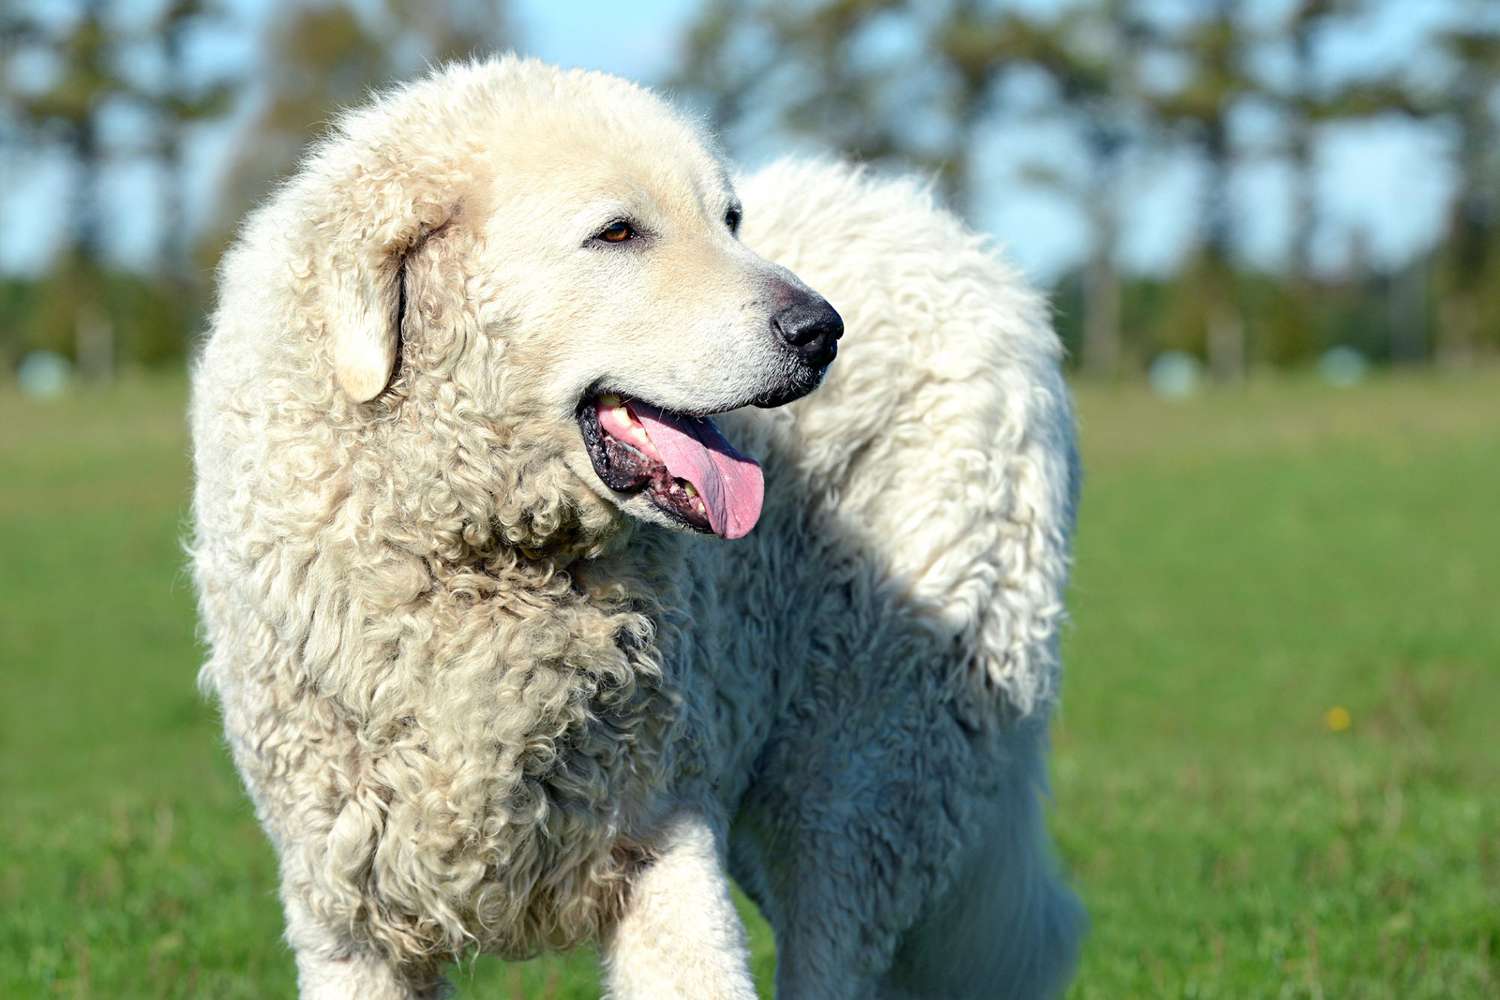 kuvasz standing with his tongue out